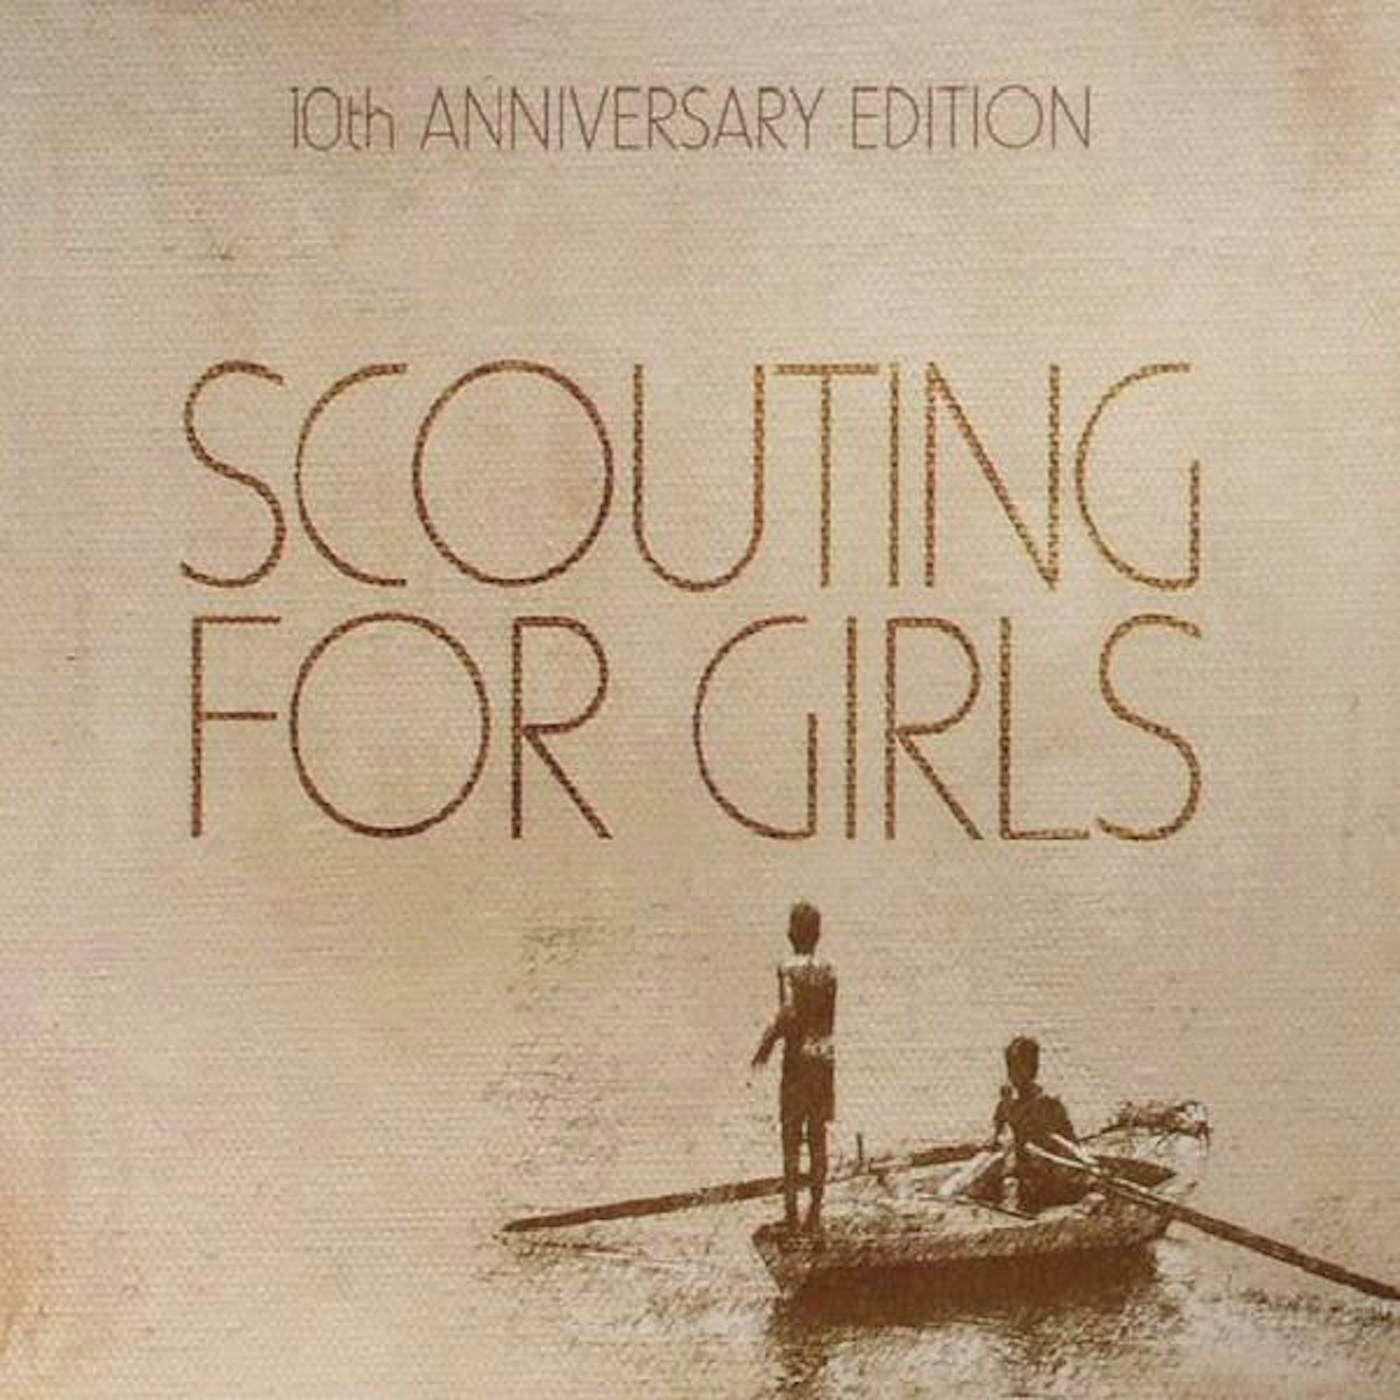 SCOUTING FOR GIRLS (DELUXE EDITION) CD